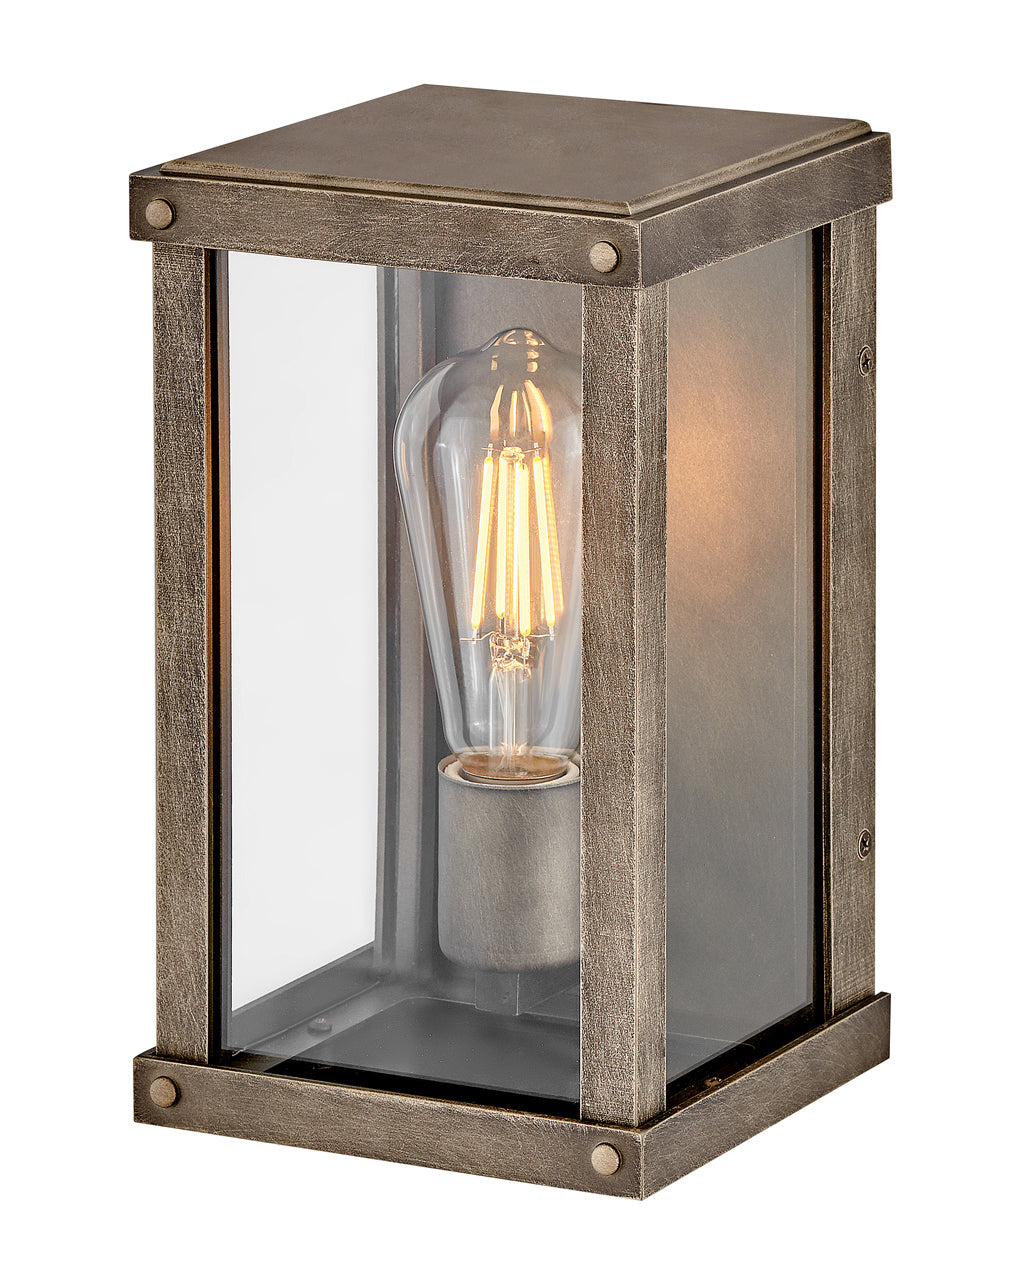 OUTDOOR BECKHAM Small Wall Mount Lantern Outdoor l Wall Hinkley Burnished Bronze 5.5x6.0x10.0 